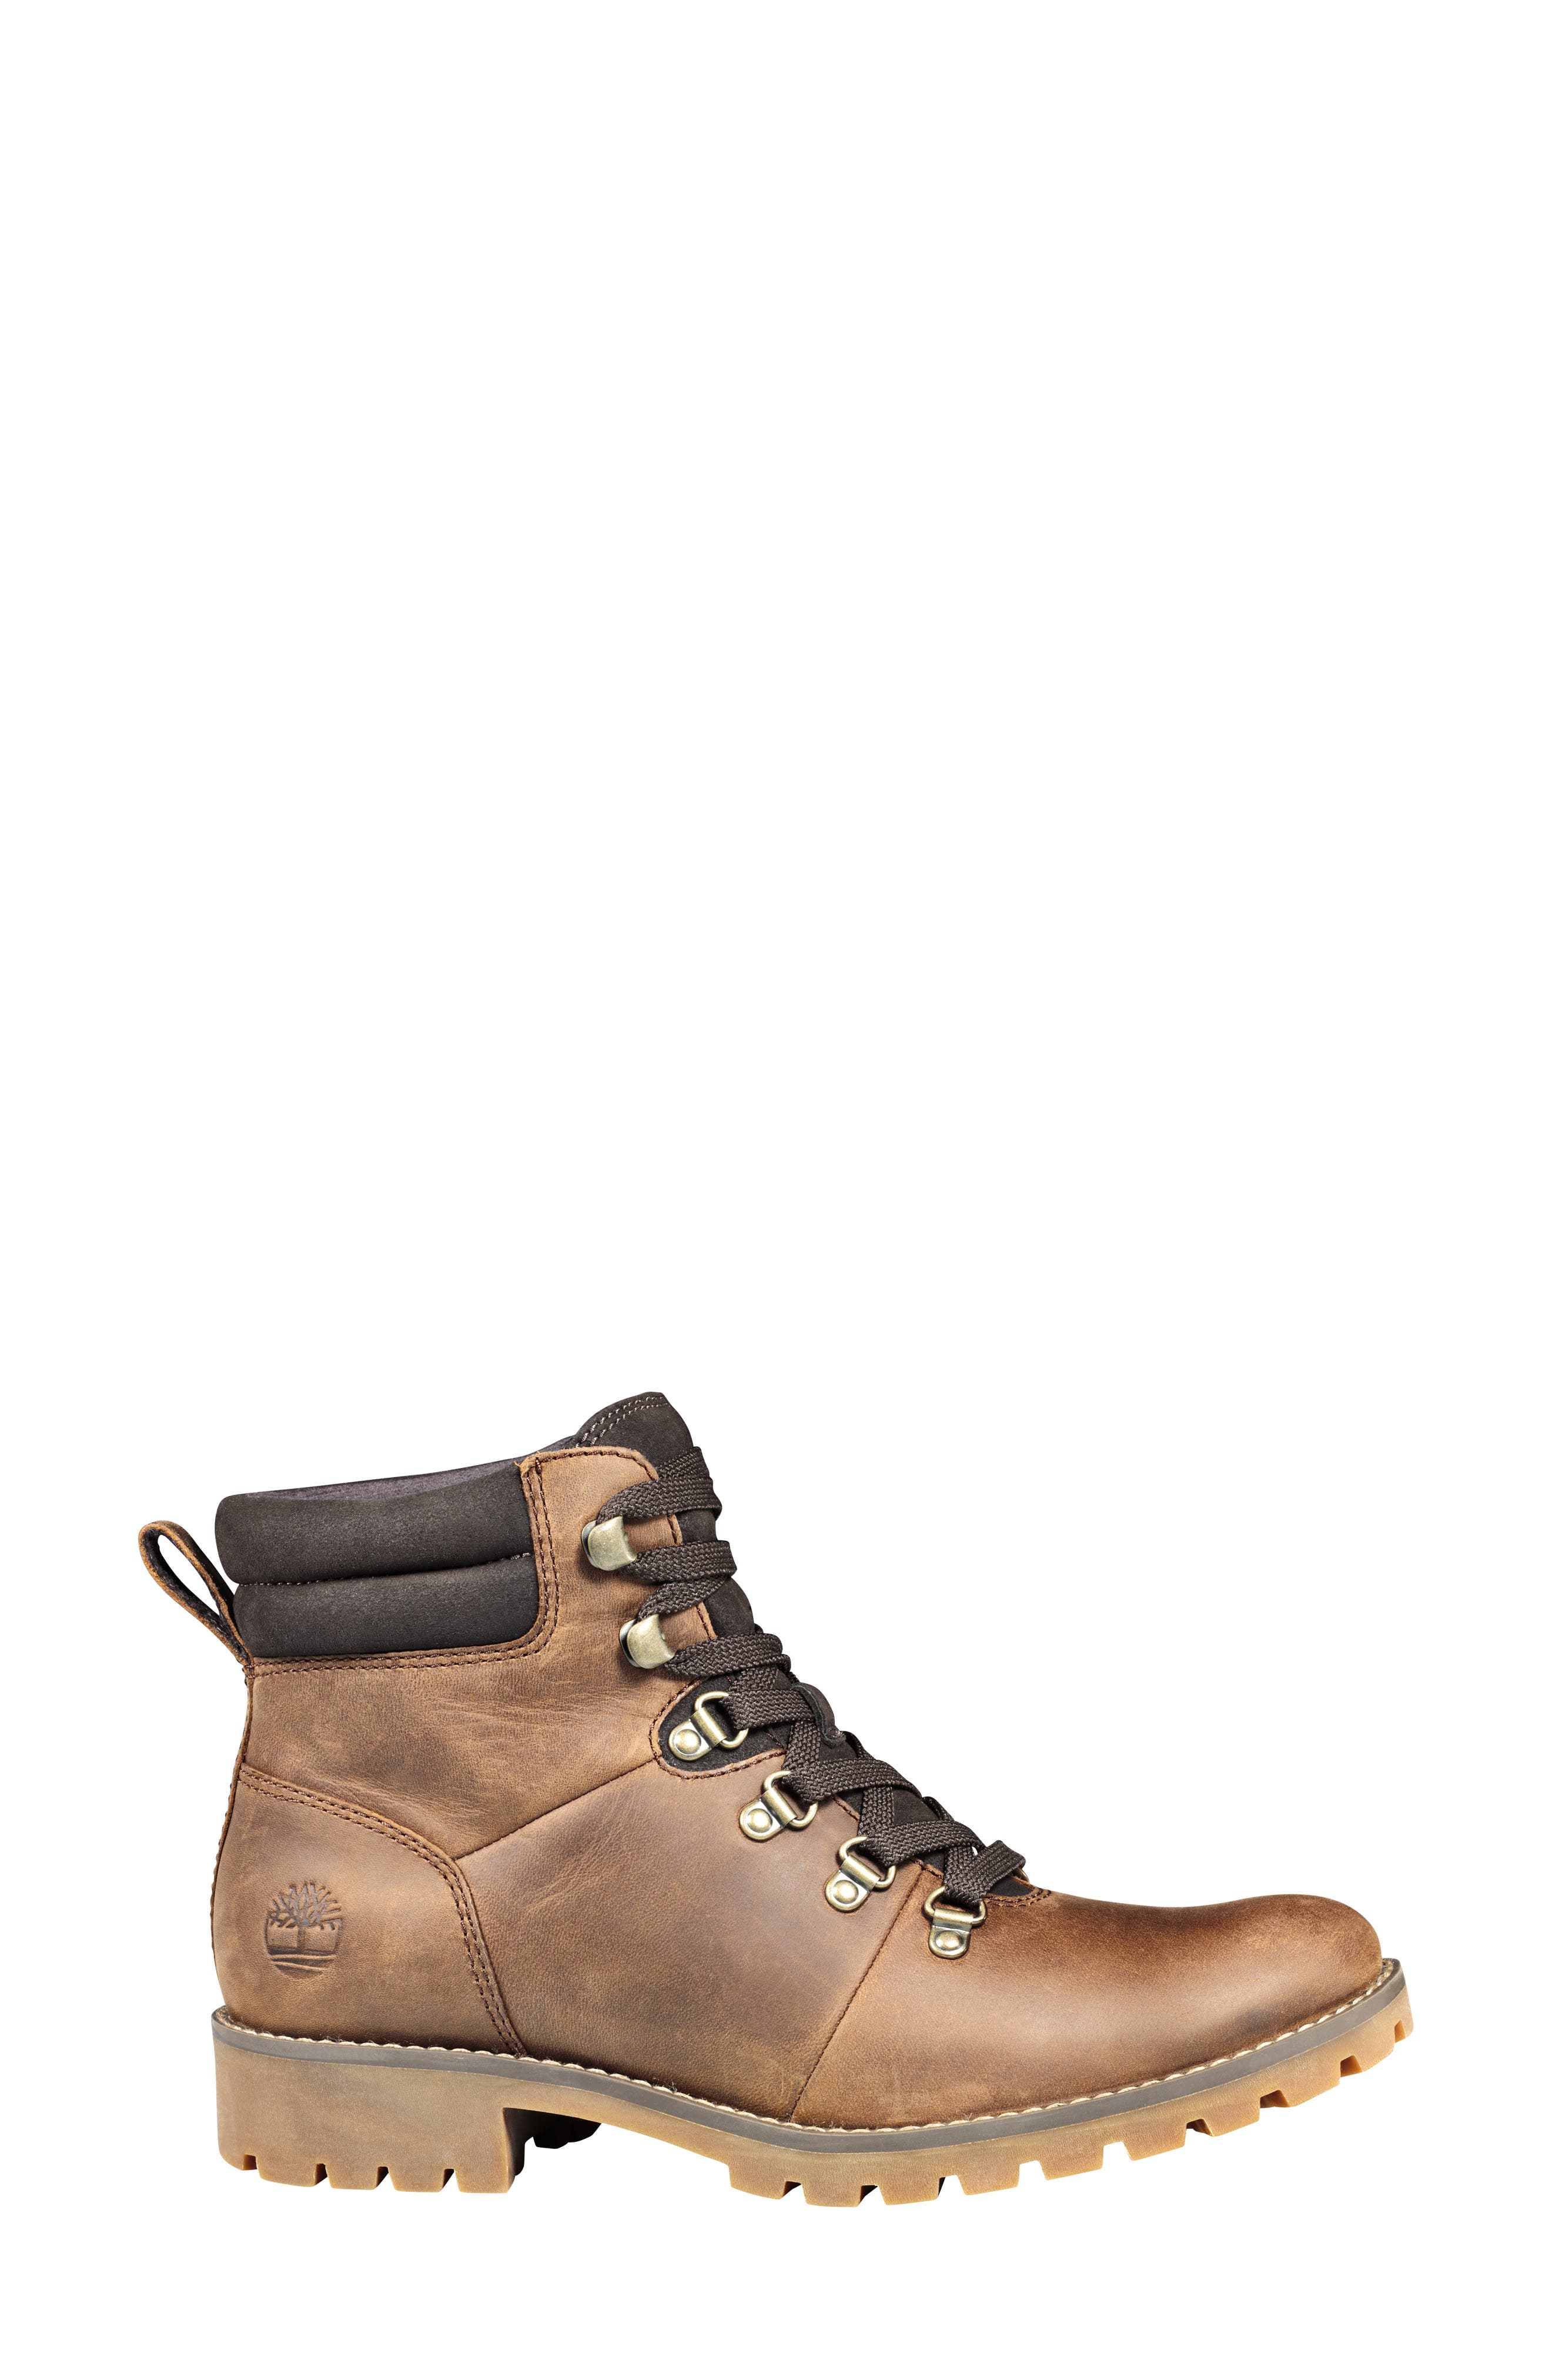 nordstrom timberland boots